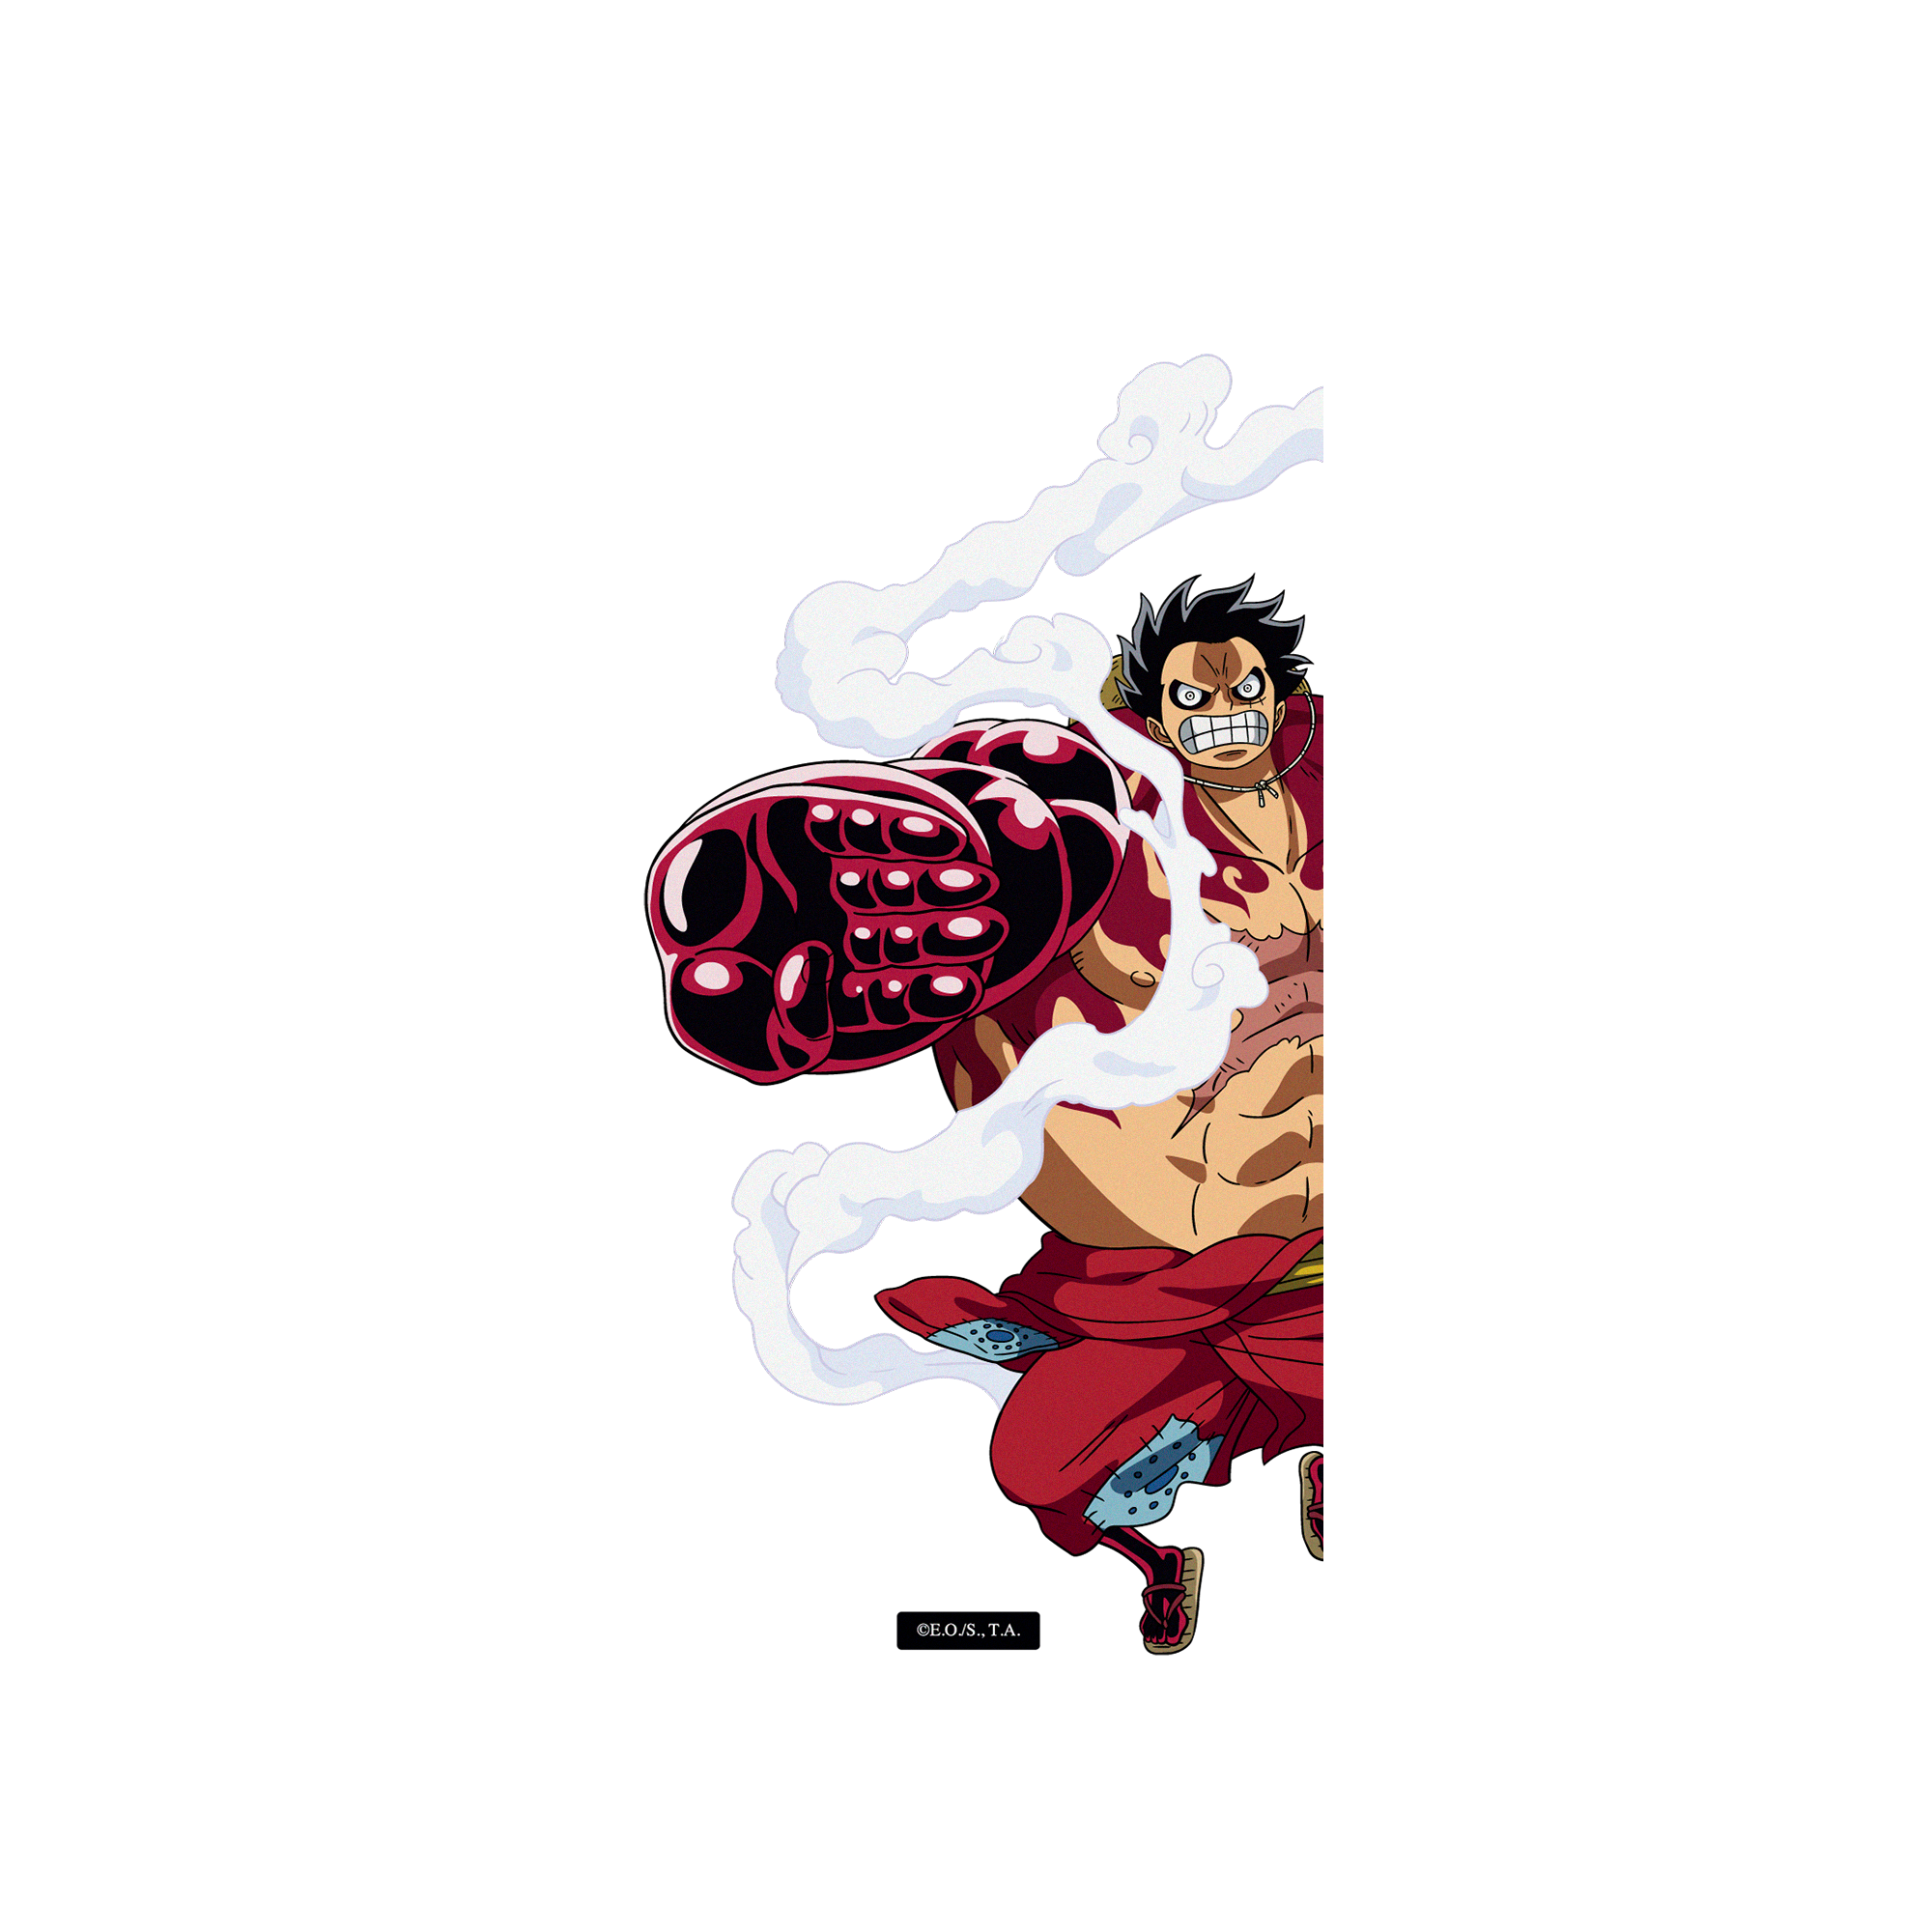 luffy-gear-4-wallpapers-backgrounds-hd-05